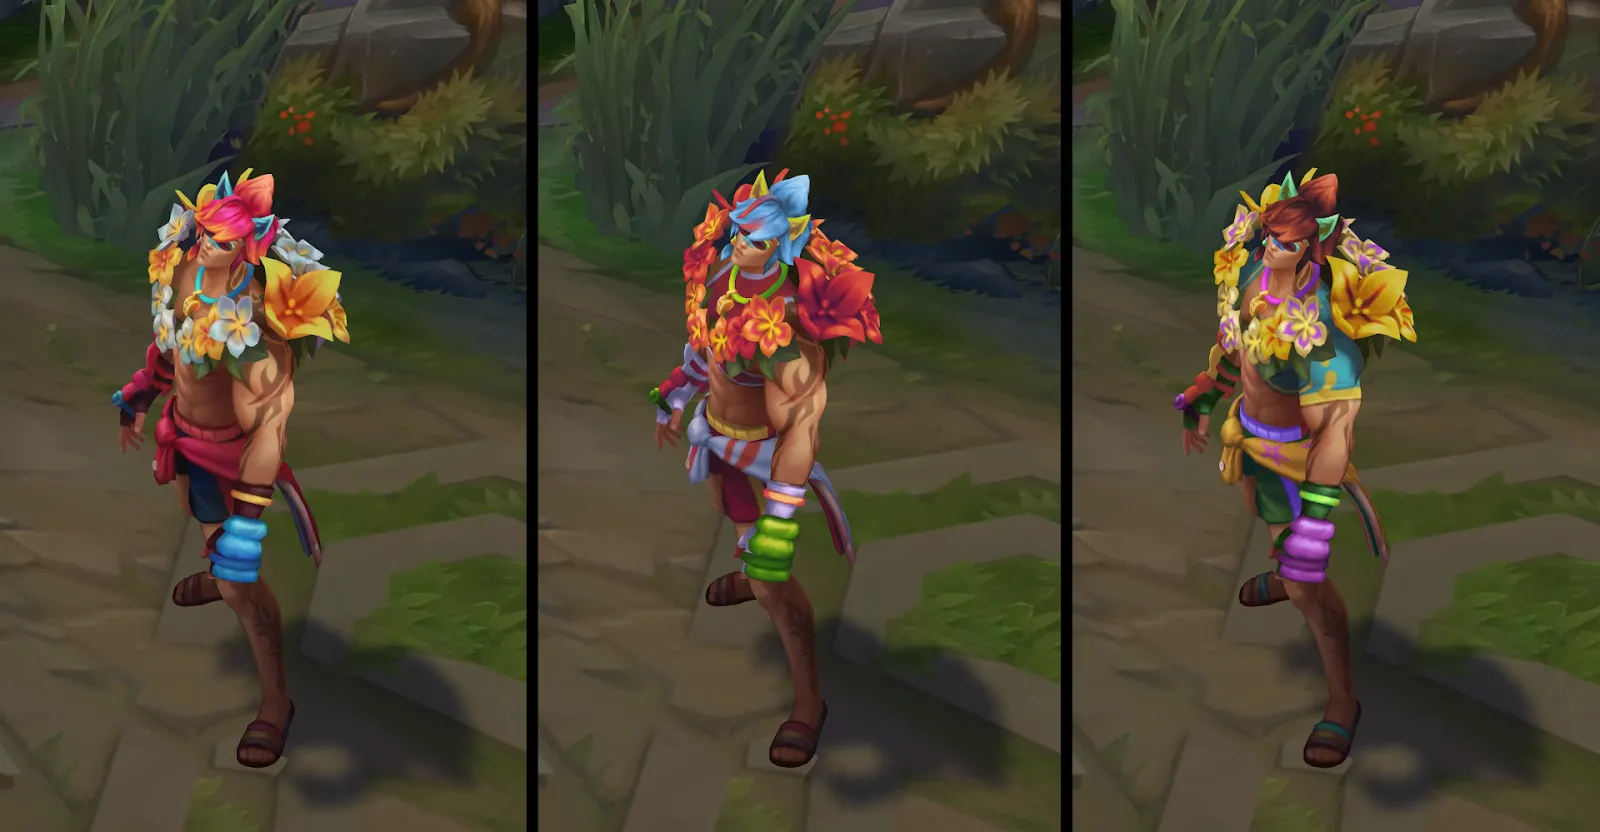 Sett in his different Pool Party skins.